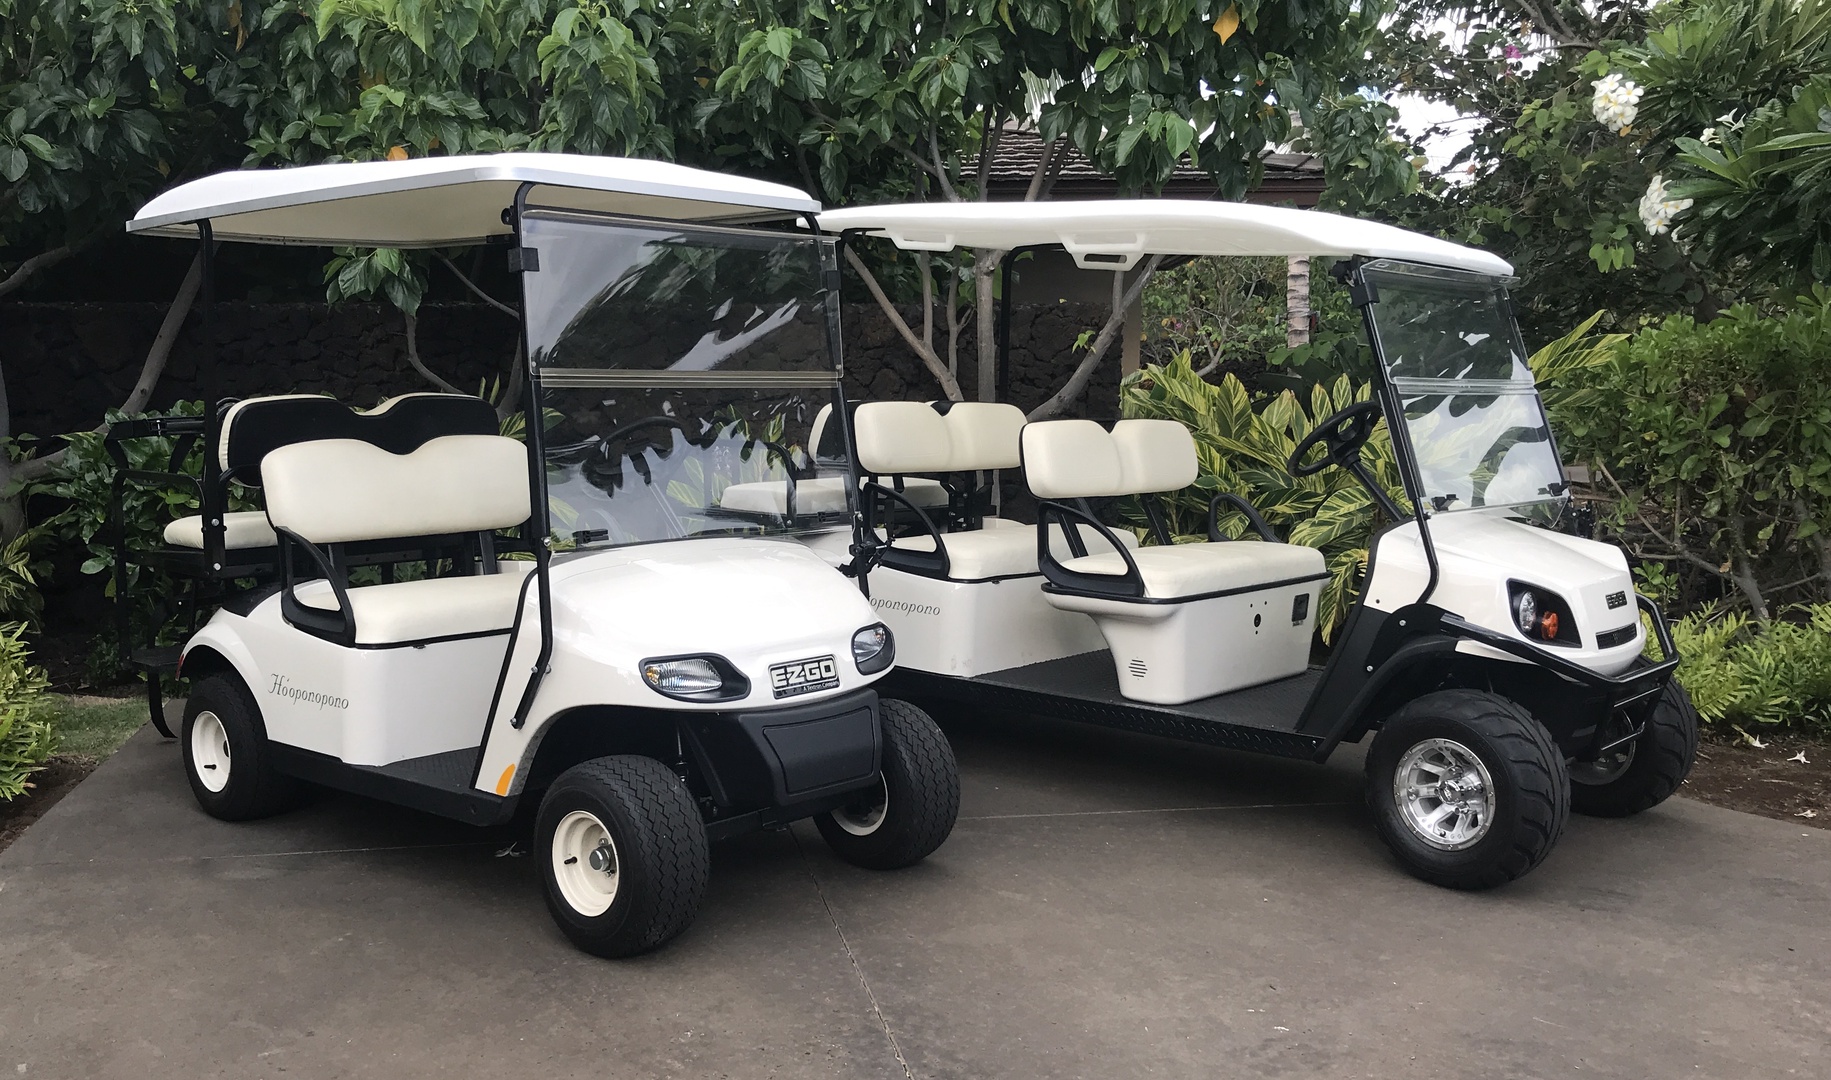 Kailua Kona Vacation Rentals, 4BD Kulanakauhale (3558) Estate Home at Four Seasons Resort at Hualalai - 2 golf carts, one 4-seater and one 6-seater, are included in your rental for cruising the dazzling resort grounds in style!